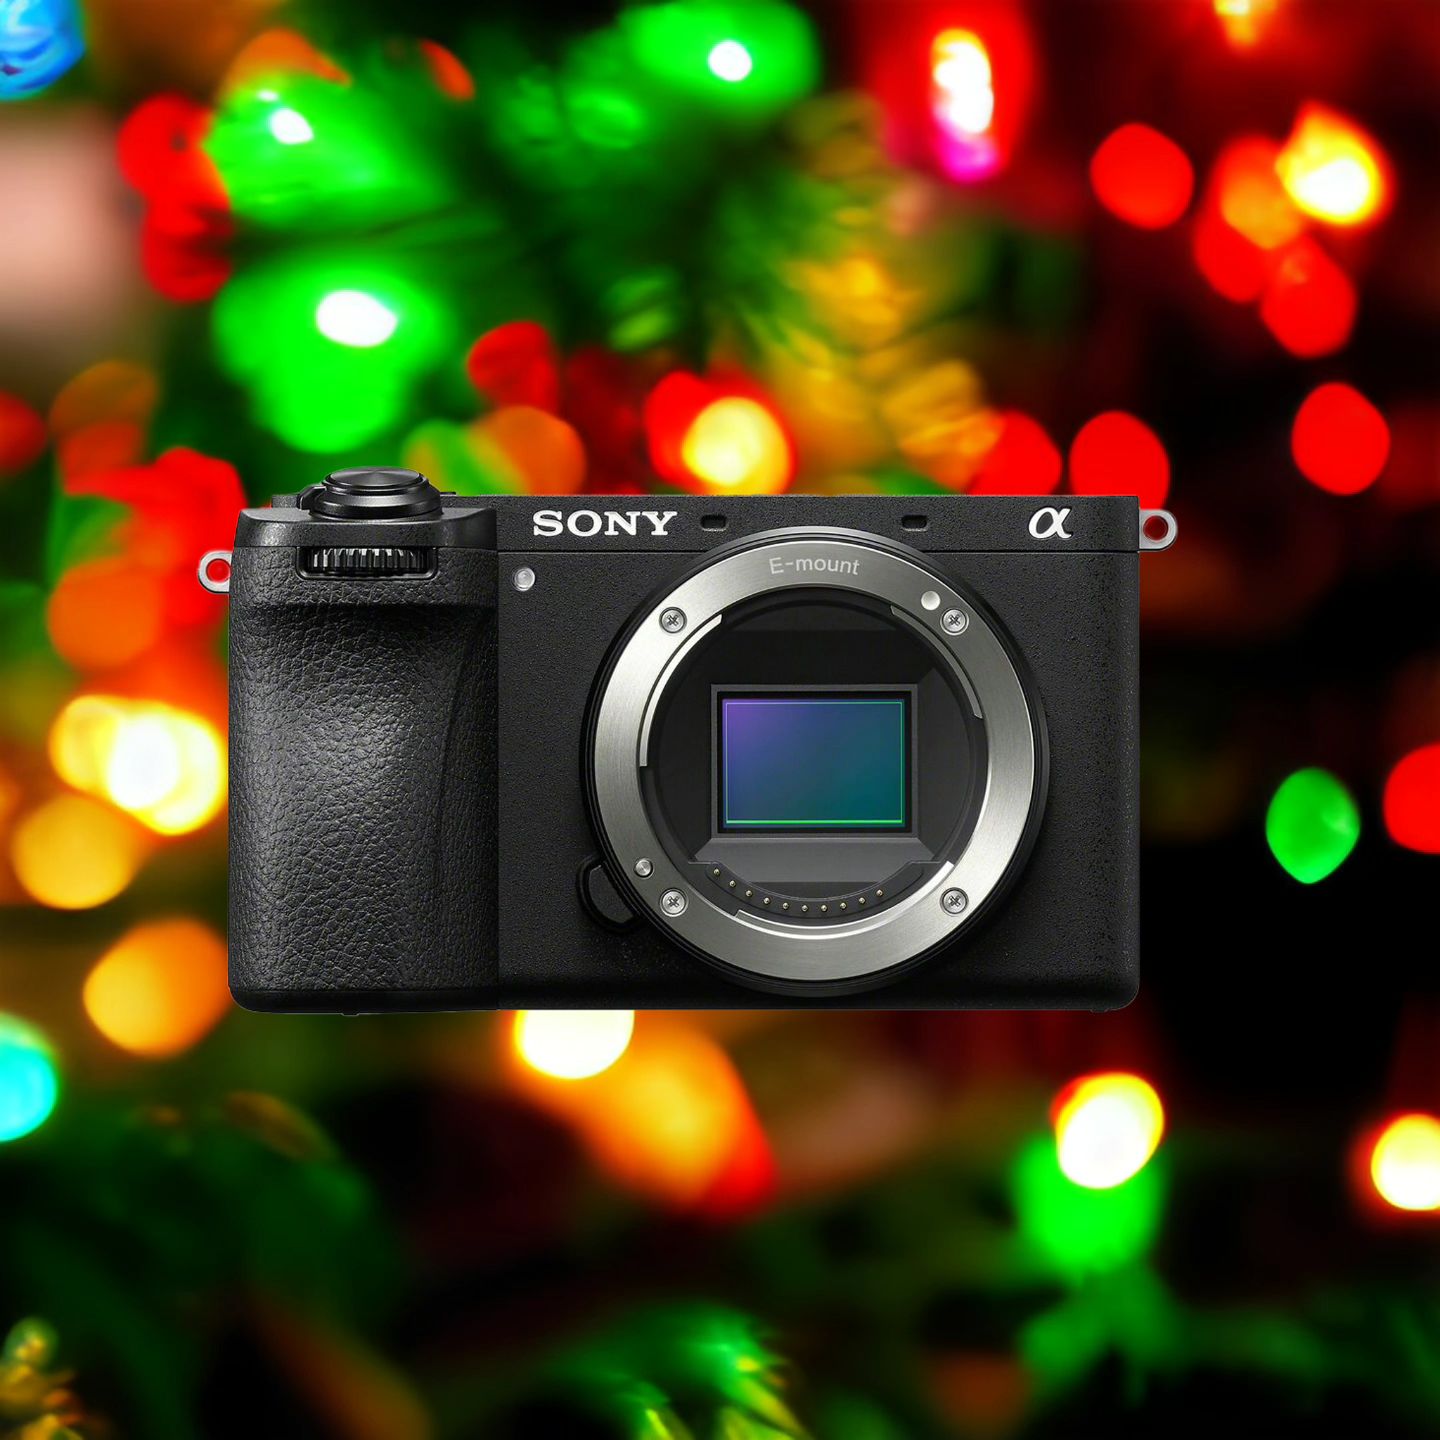 GIVEAWAY ANNOUNCEMENT UPDATE!!!

We have decided to extend the giveaway deadline for the 26mp Sony a6700 mirror less camera to December 18th. Still plenty of chances to earn a chance to win this impressive mirror less camera. See all the details below!

The Rules are simple:
1. Like this post
2. Tag atleast three friends that you hope they could win the camera
3. You must be following me here on IG

Extra Entries:
For an additional entry, you can share this post about the giveaway as an IG story but don't forget to tag me, otherwise I can't mark it down.

The giveaway will last through December 25th, ending at 11:59pm. Winners will be announced on January  1st during an IG Live feed. You must be watching the live feed to win.

The winner will be chosen at random using Random.org along with a spreadsheet of all the entries.

This giveaway is not sponsored by Instagram or Sony. Void where prohibited.